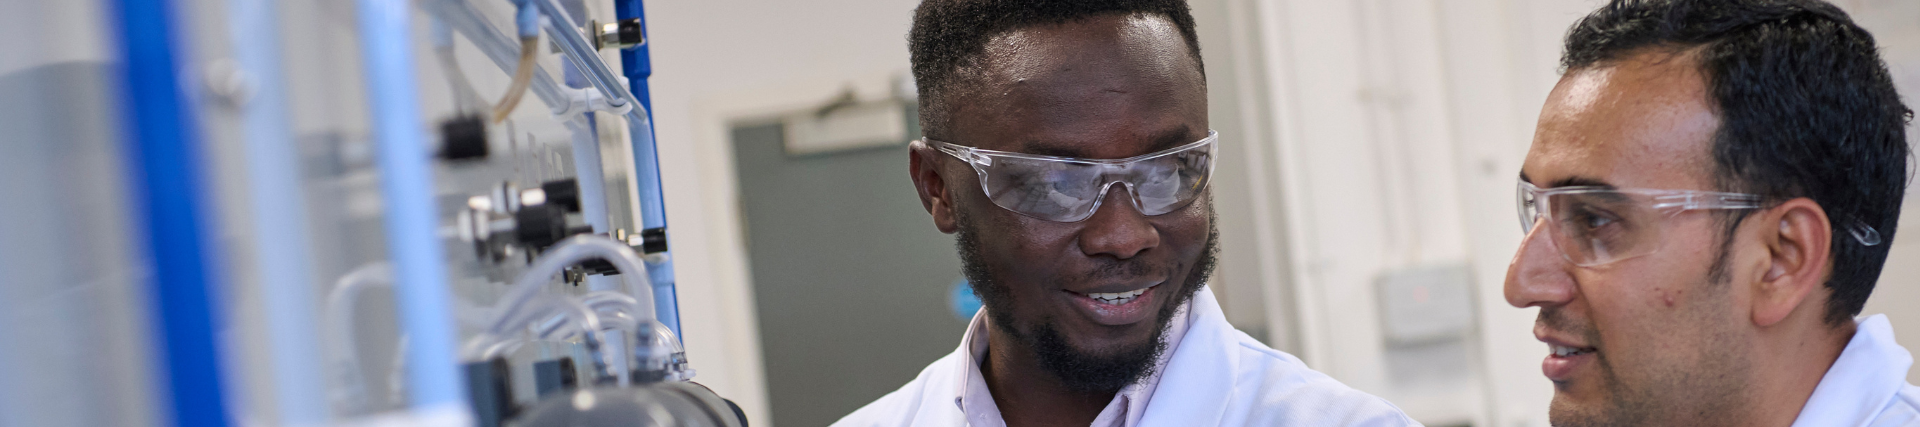 A student with a lecturer in a lab, wearing protective glasses.